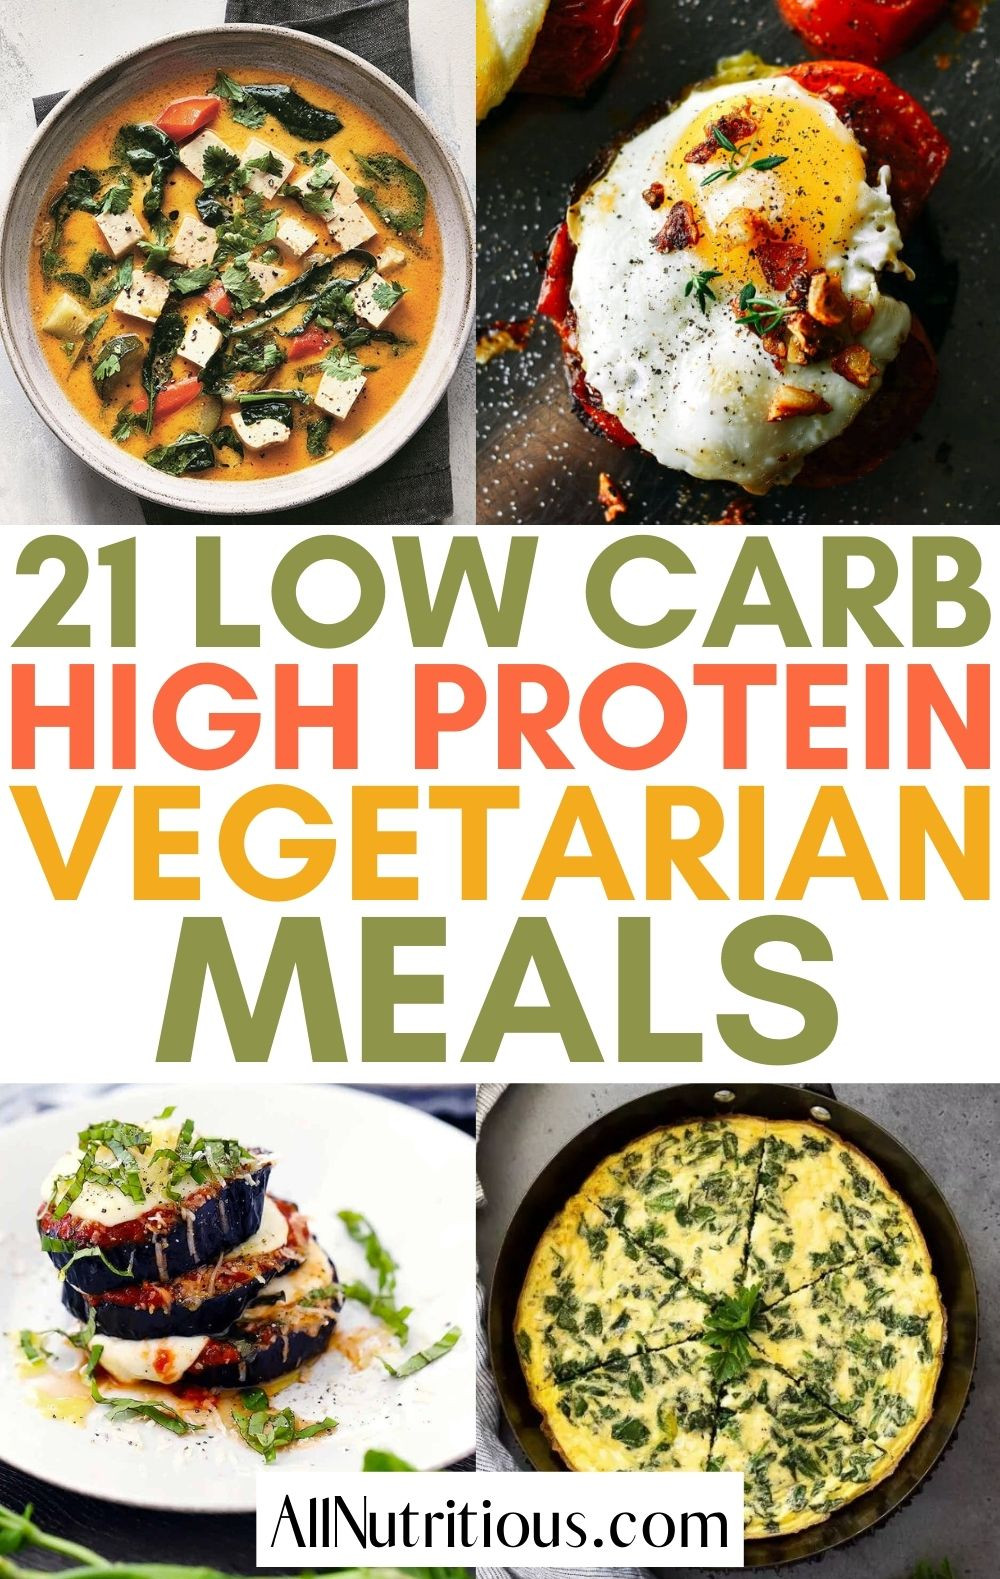 High Protein Low Carb Vegetarian Meals Awesome 21 High Protein Low Carb Ve Arian Meals All Nutritious